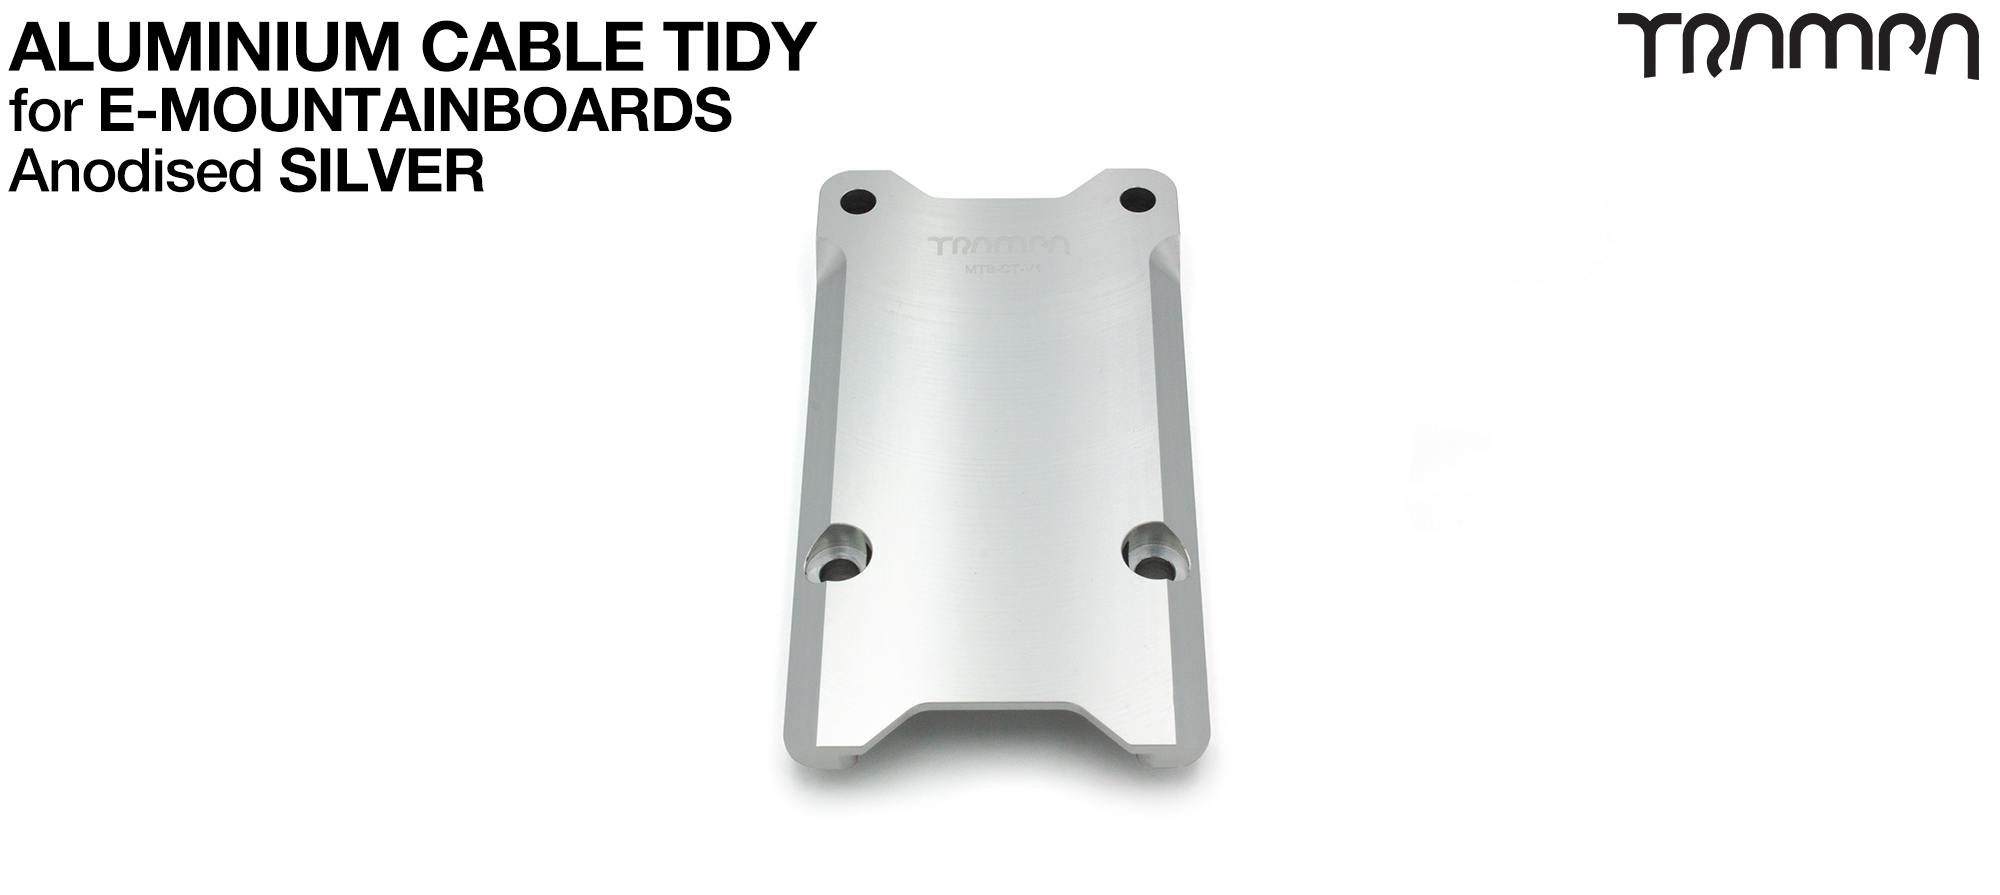 Anodised Aluminum Cable Tidy - SILVER